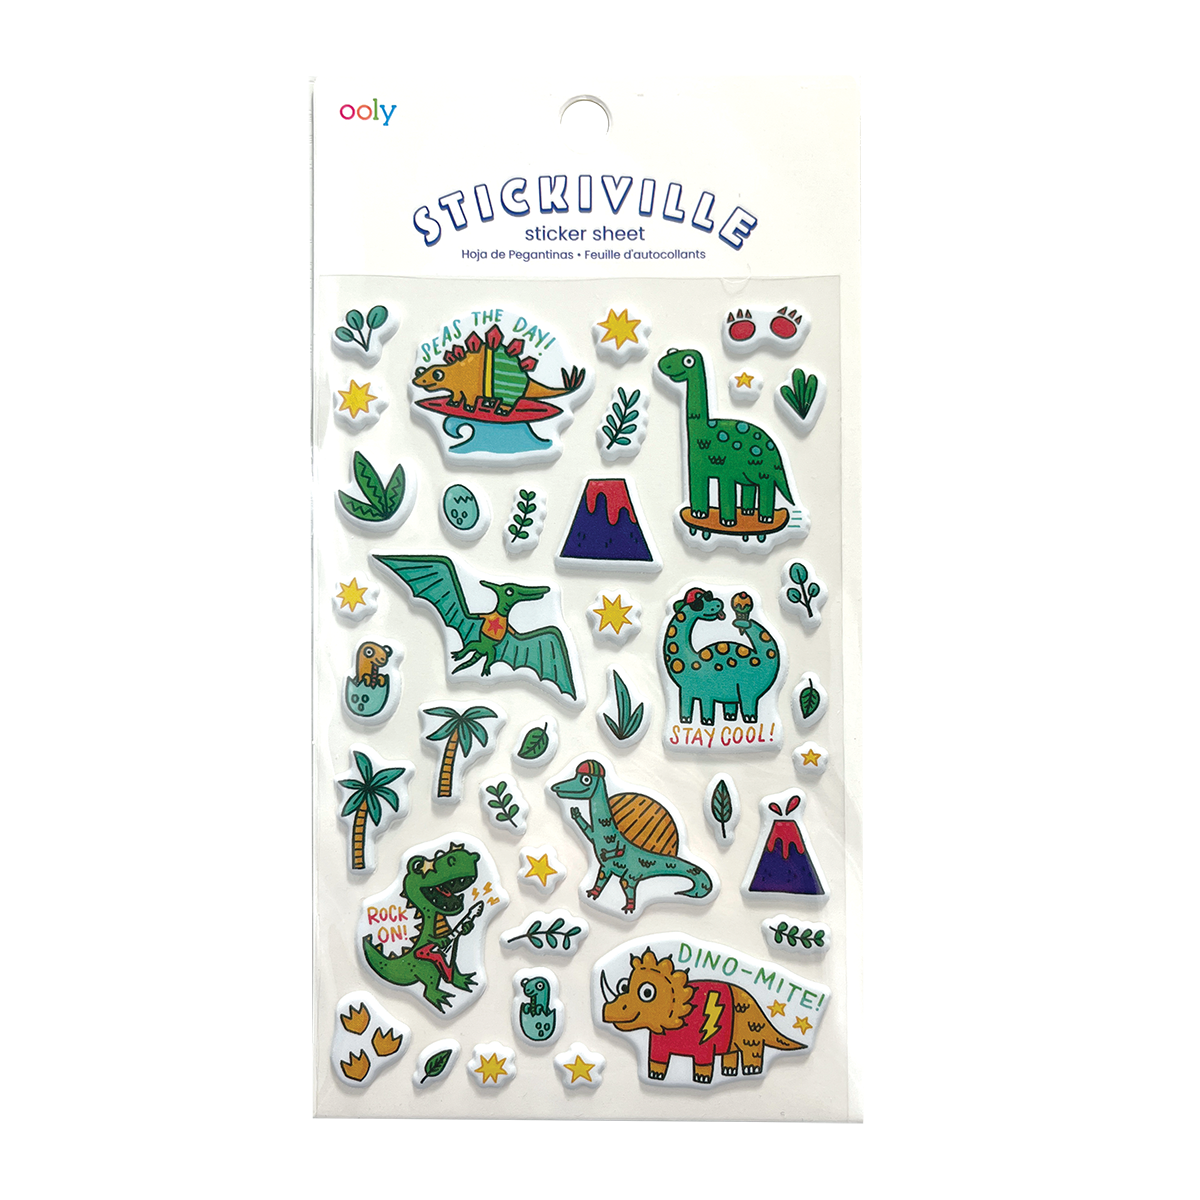 OOLY Stickiville Dino-Mite! Stickers inside packaging